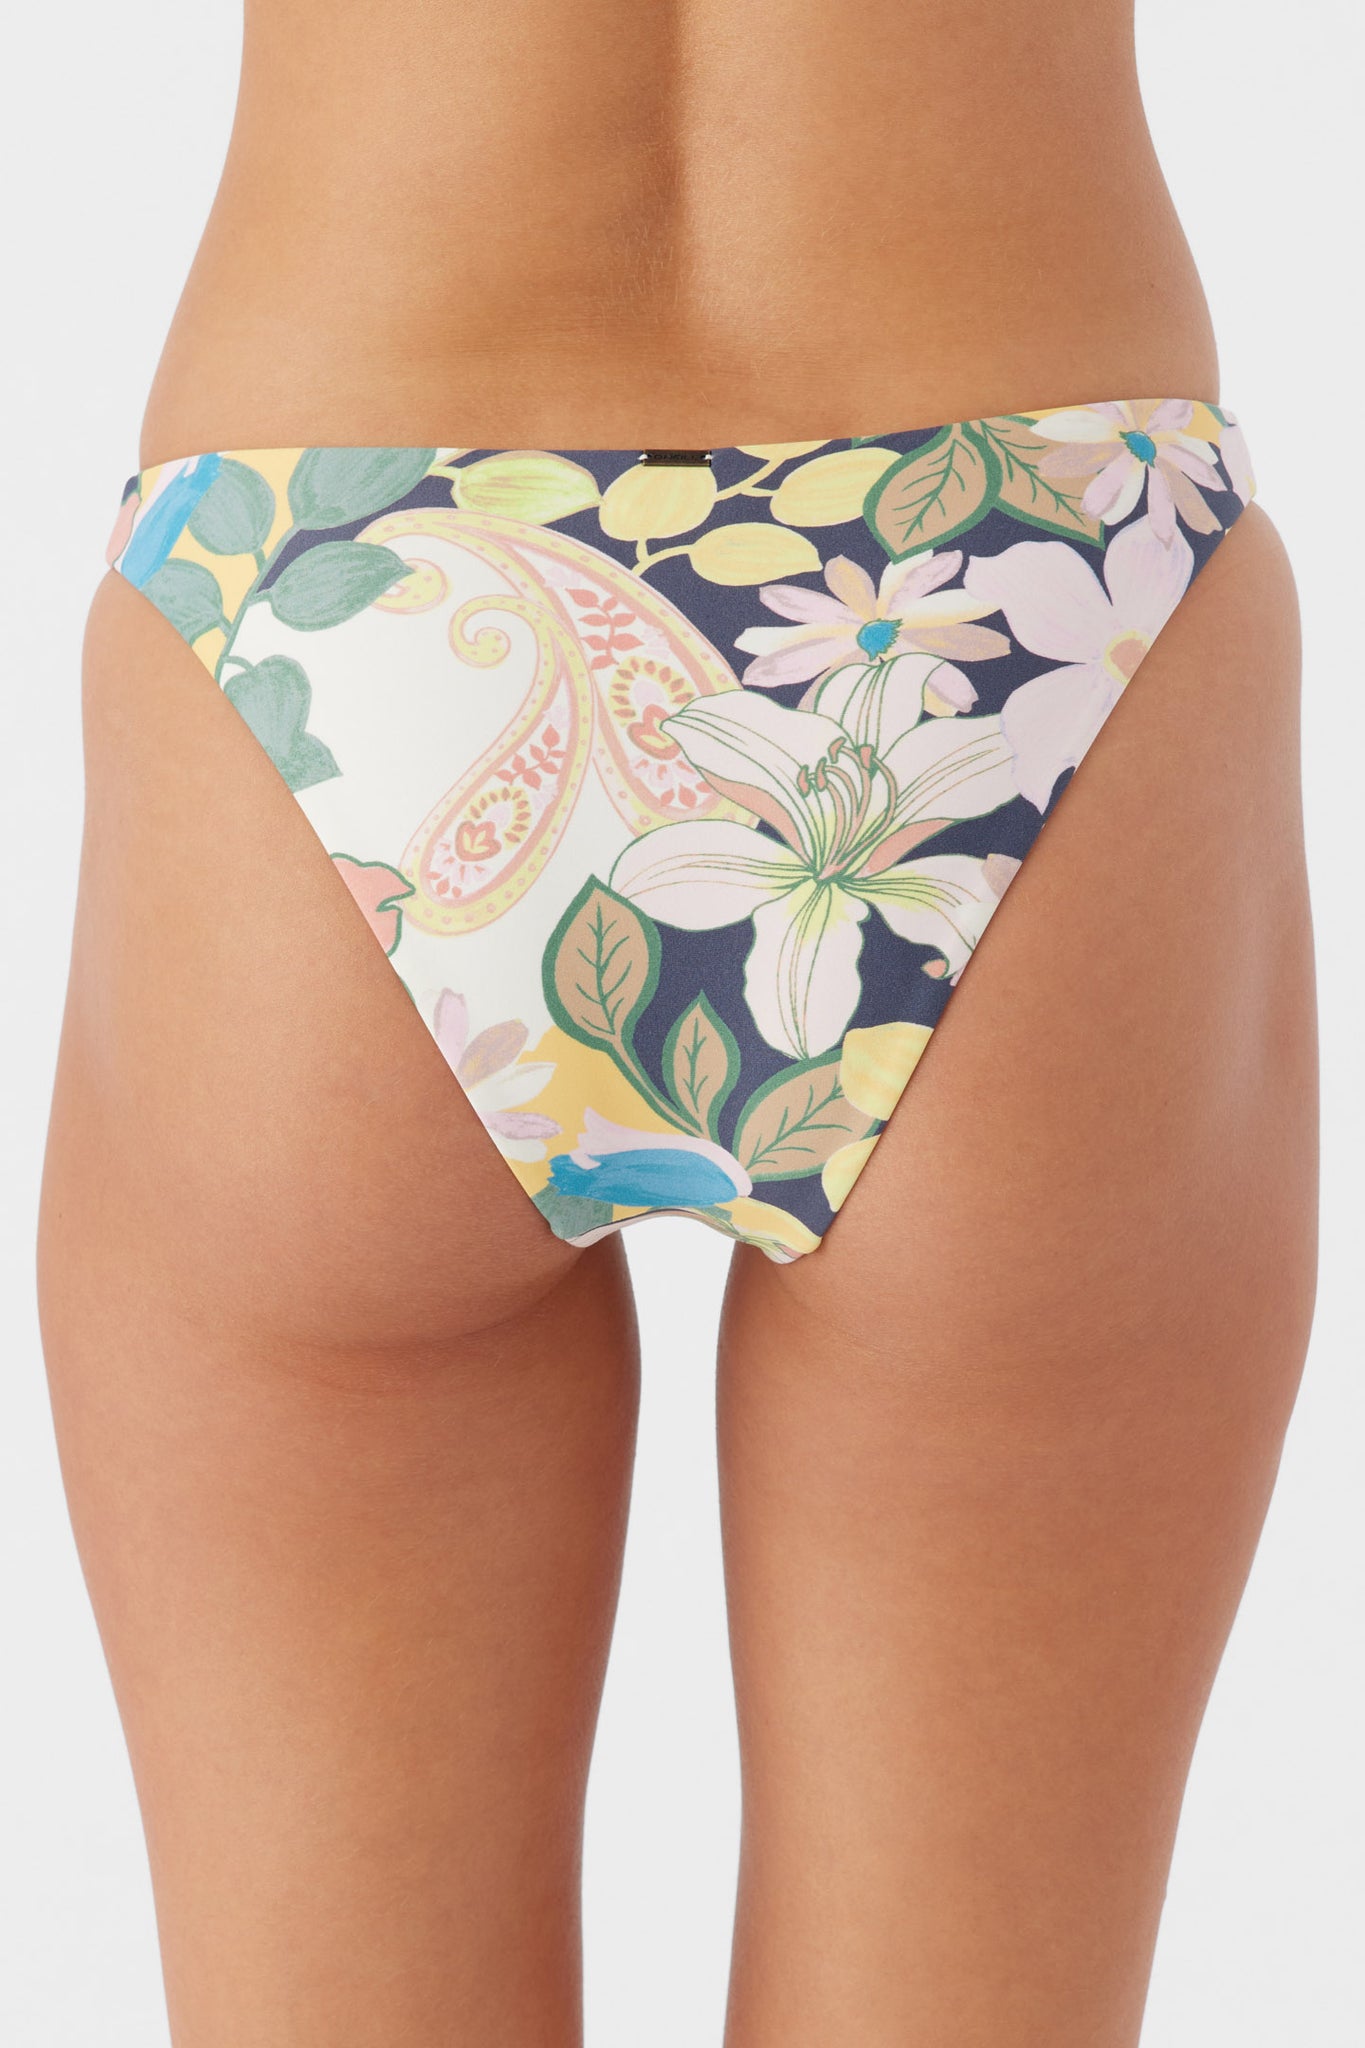 MADISON FLORAL FLAMENCO CHEEKY BOTTOMS